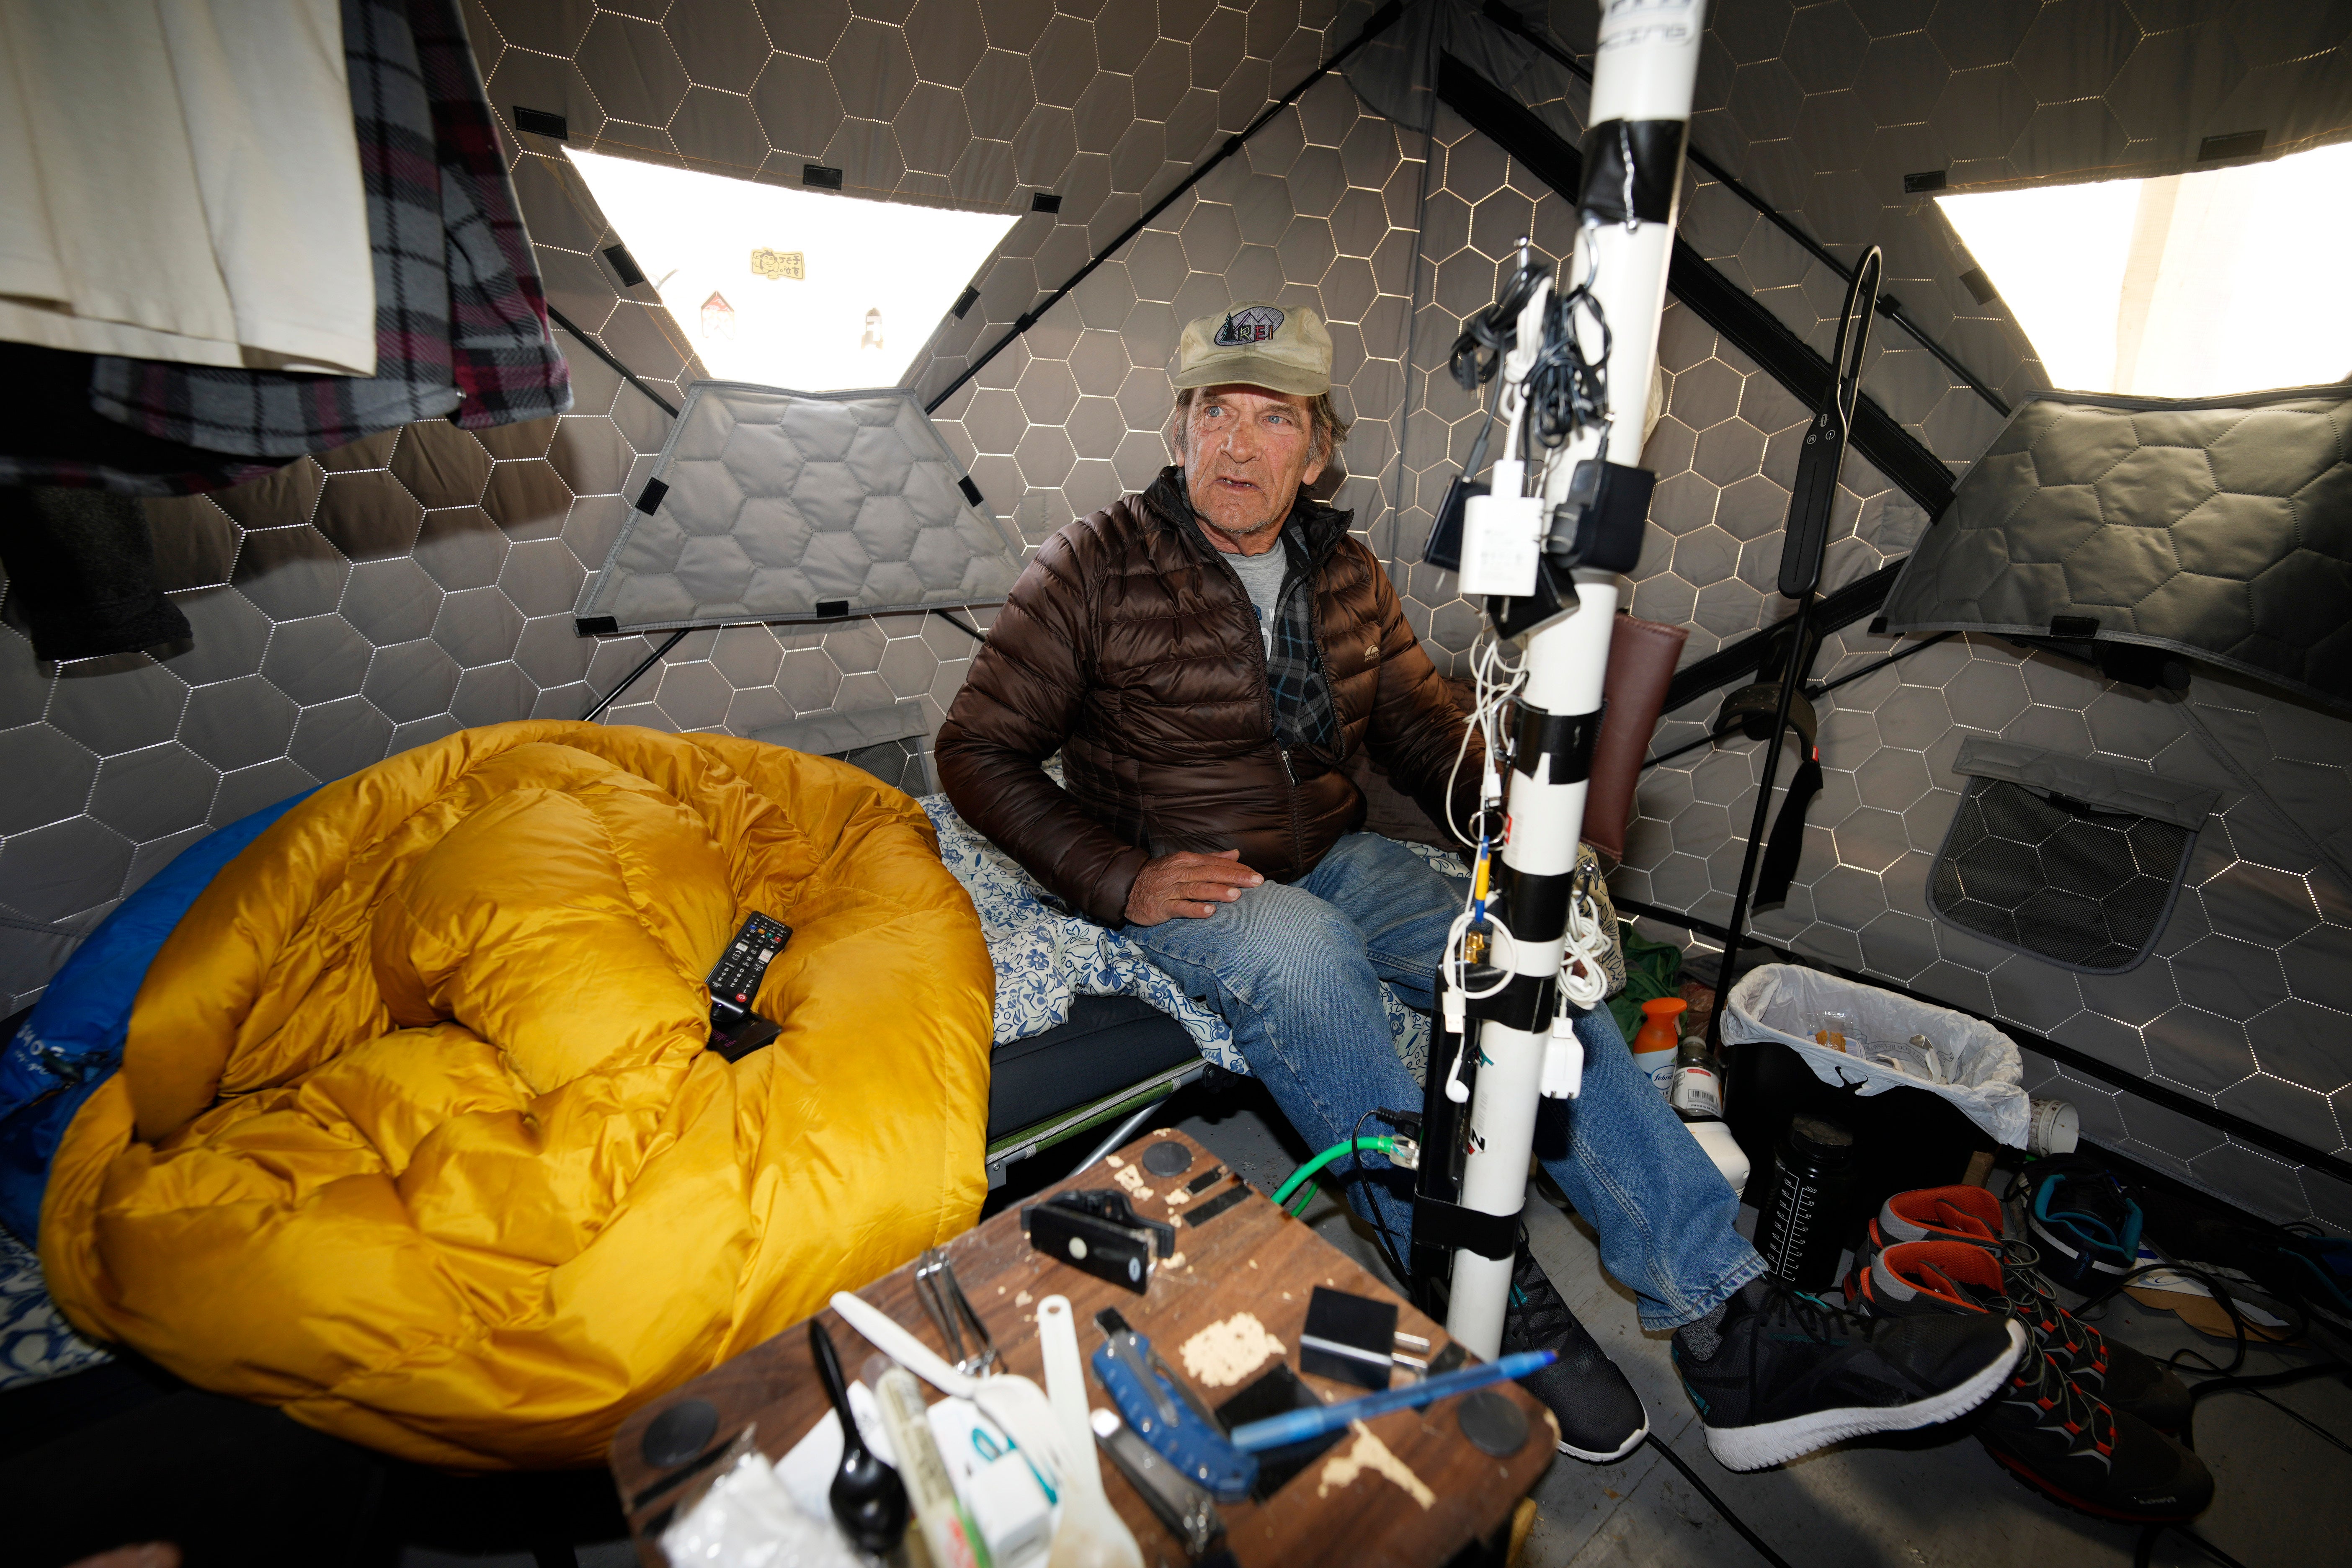 Gary Peters takes a break in his tent at the east safe outdoor space in the parking lot of the city of Denver Human Service building in Denver